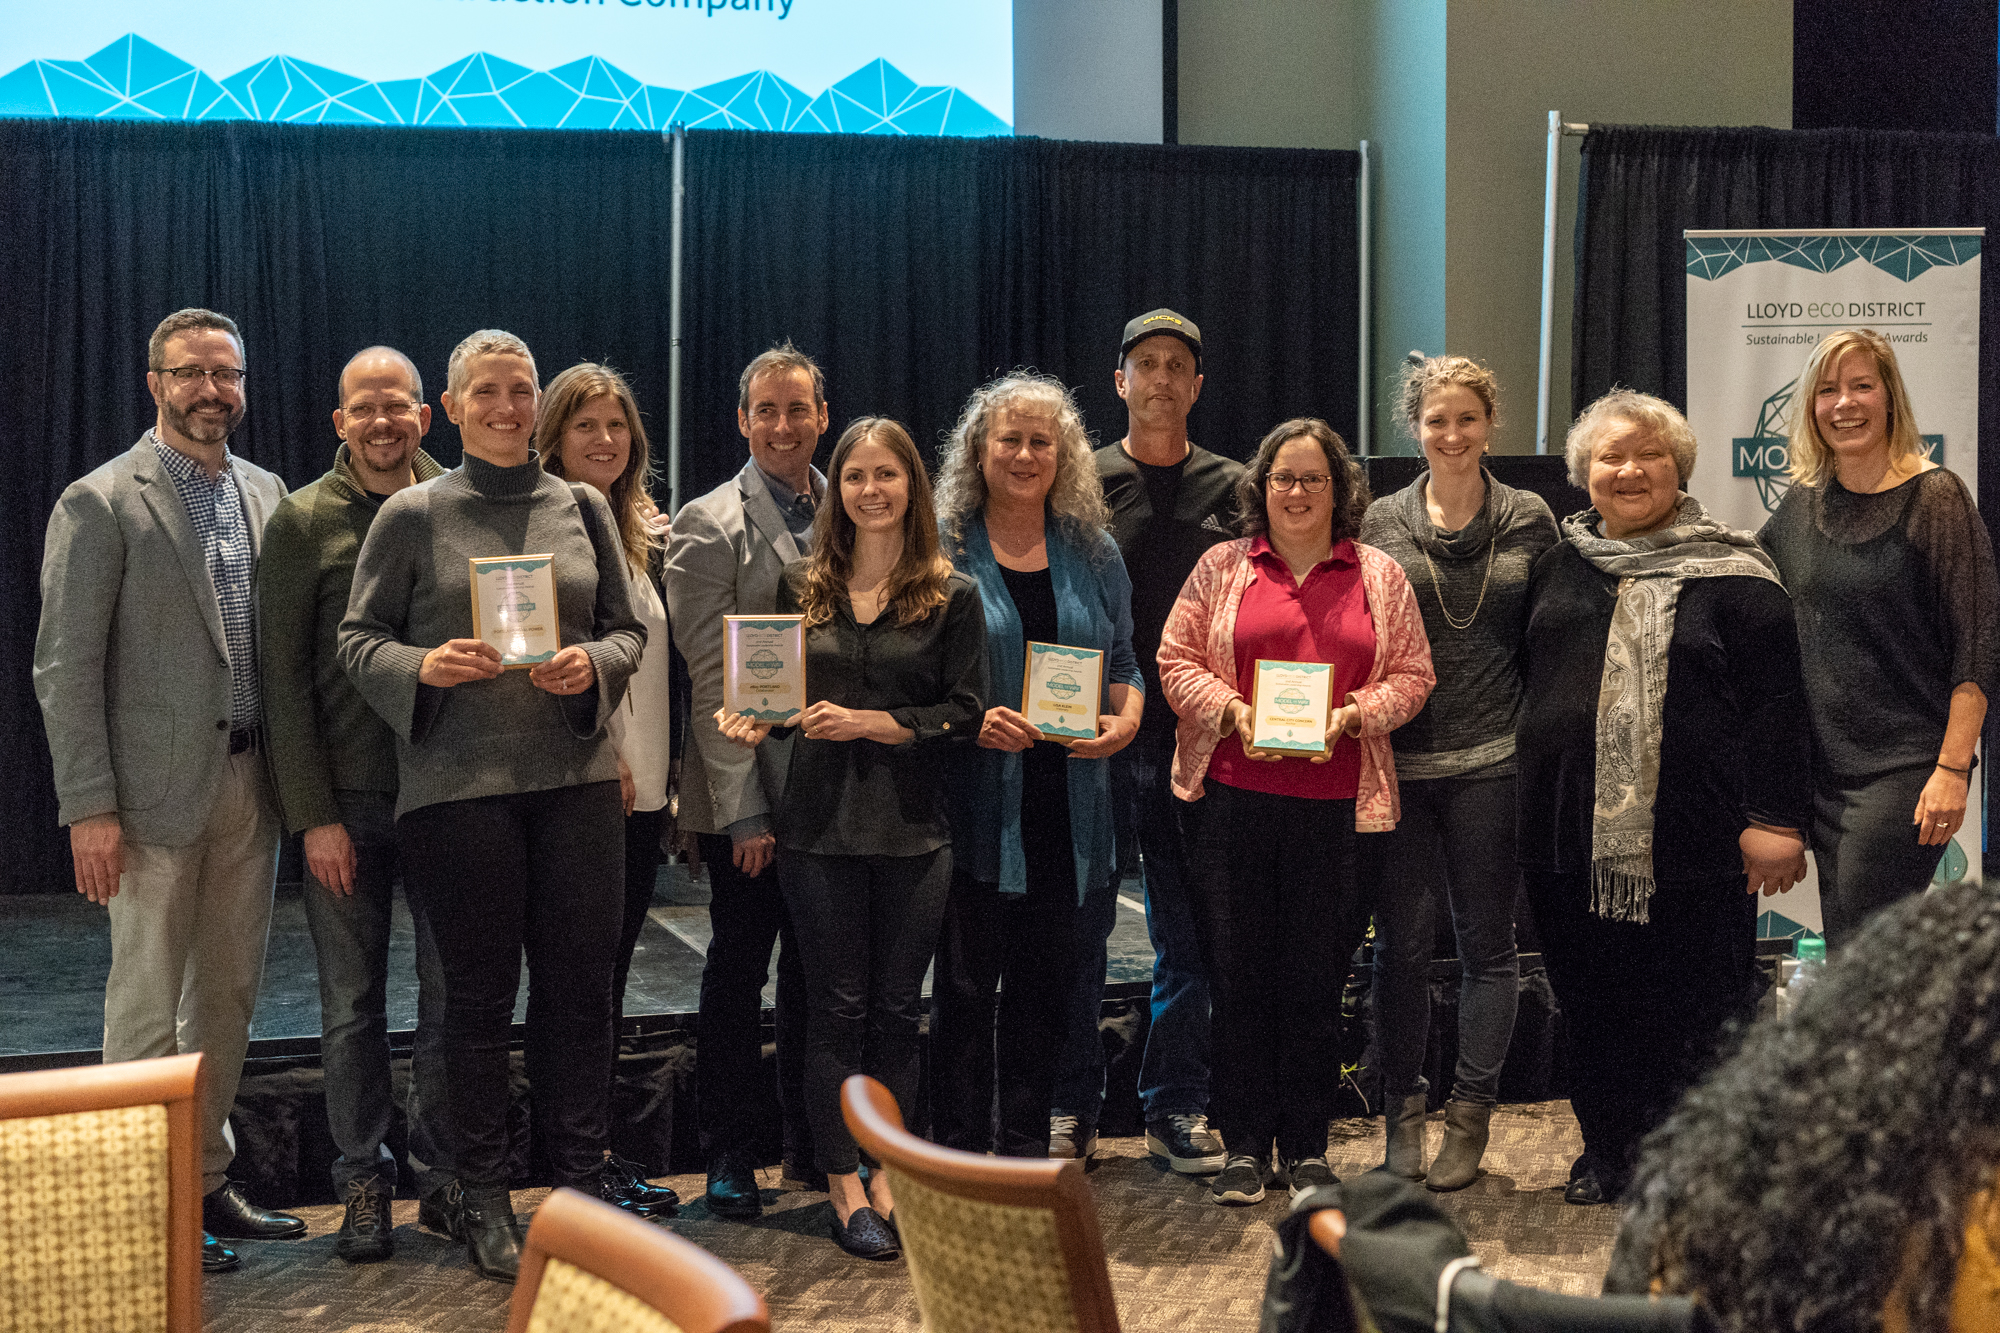 2018 Model the Way Award Winners. 10 people standing at up holding award and smiling. 